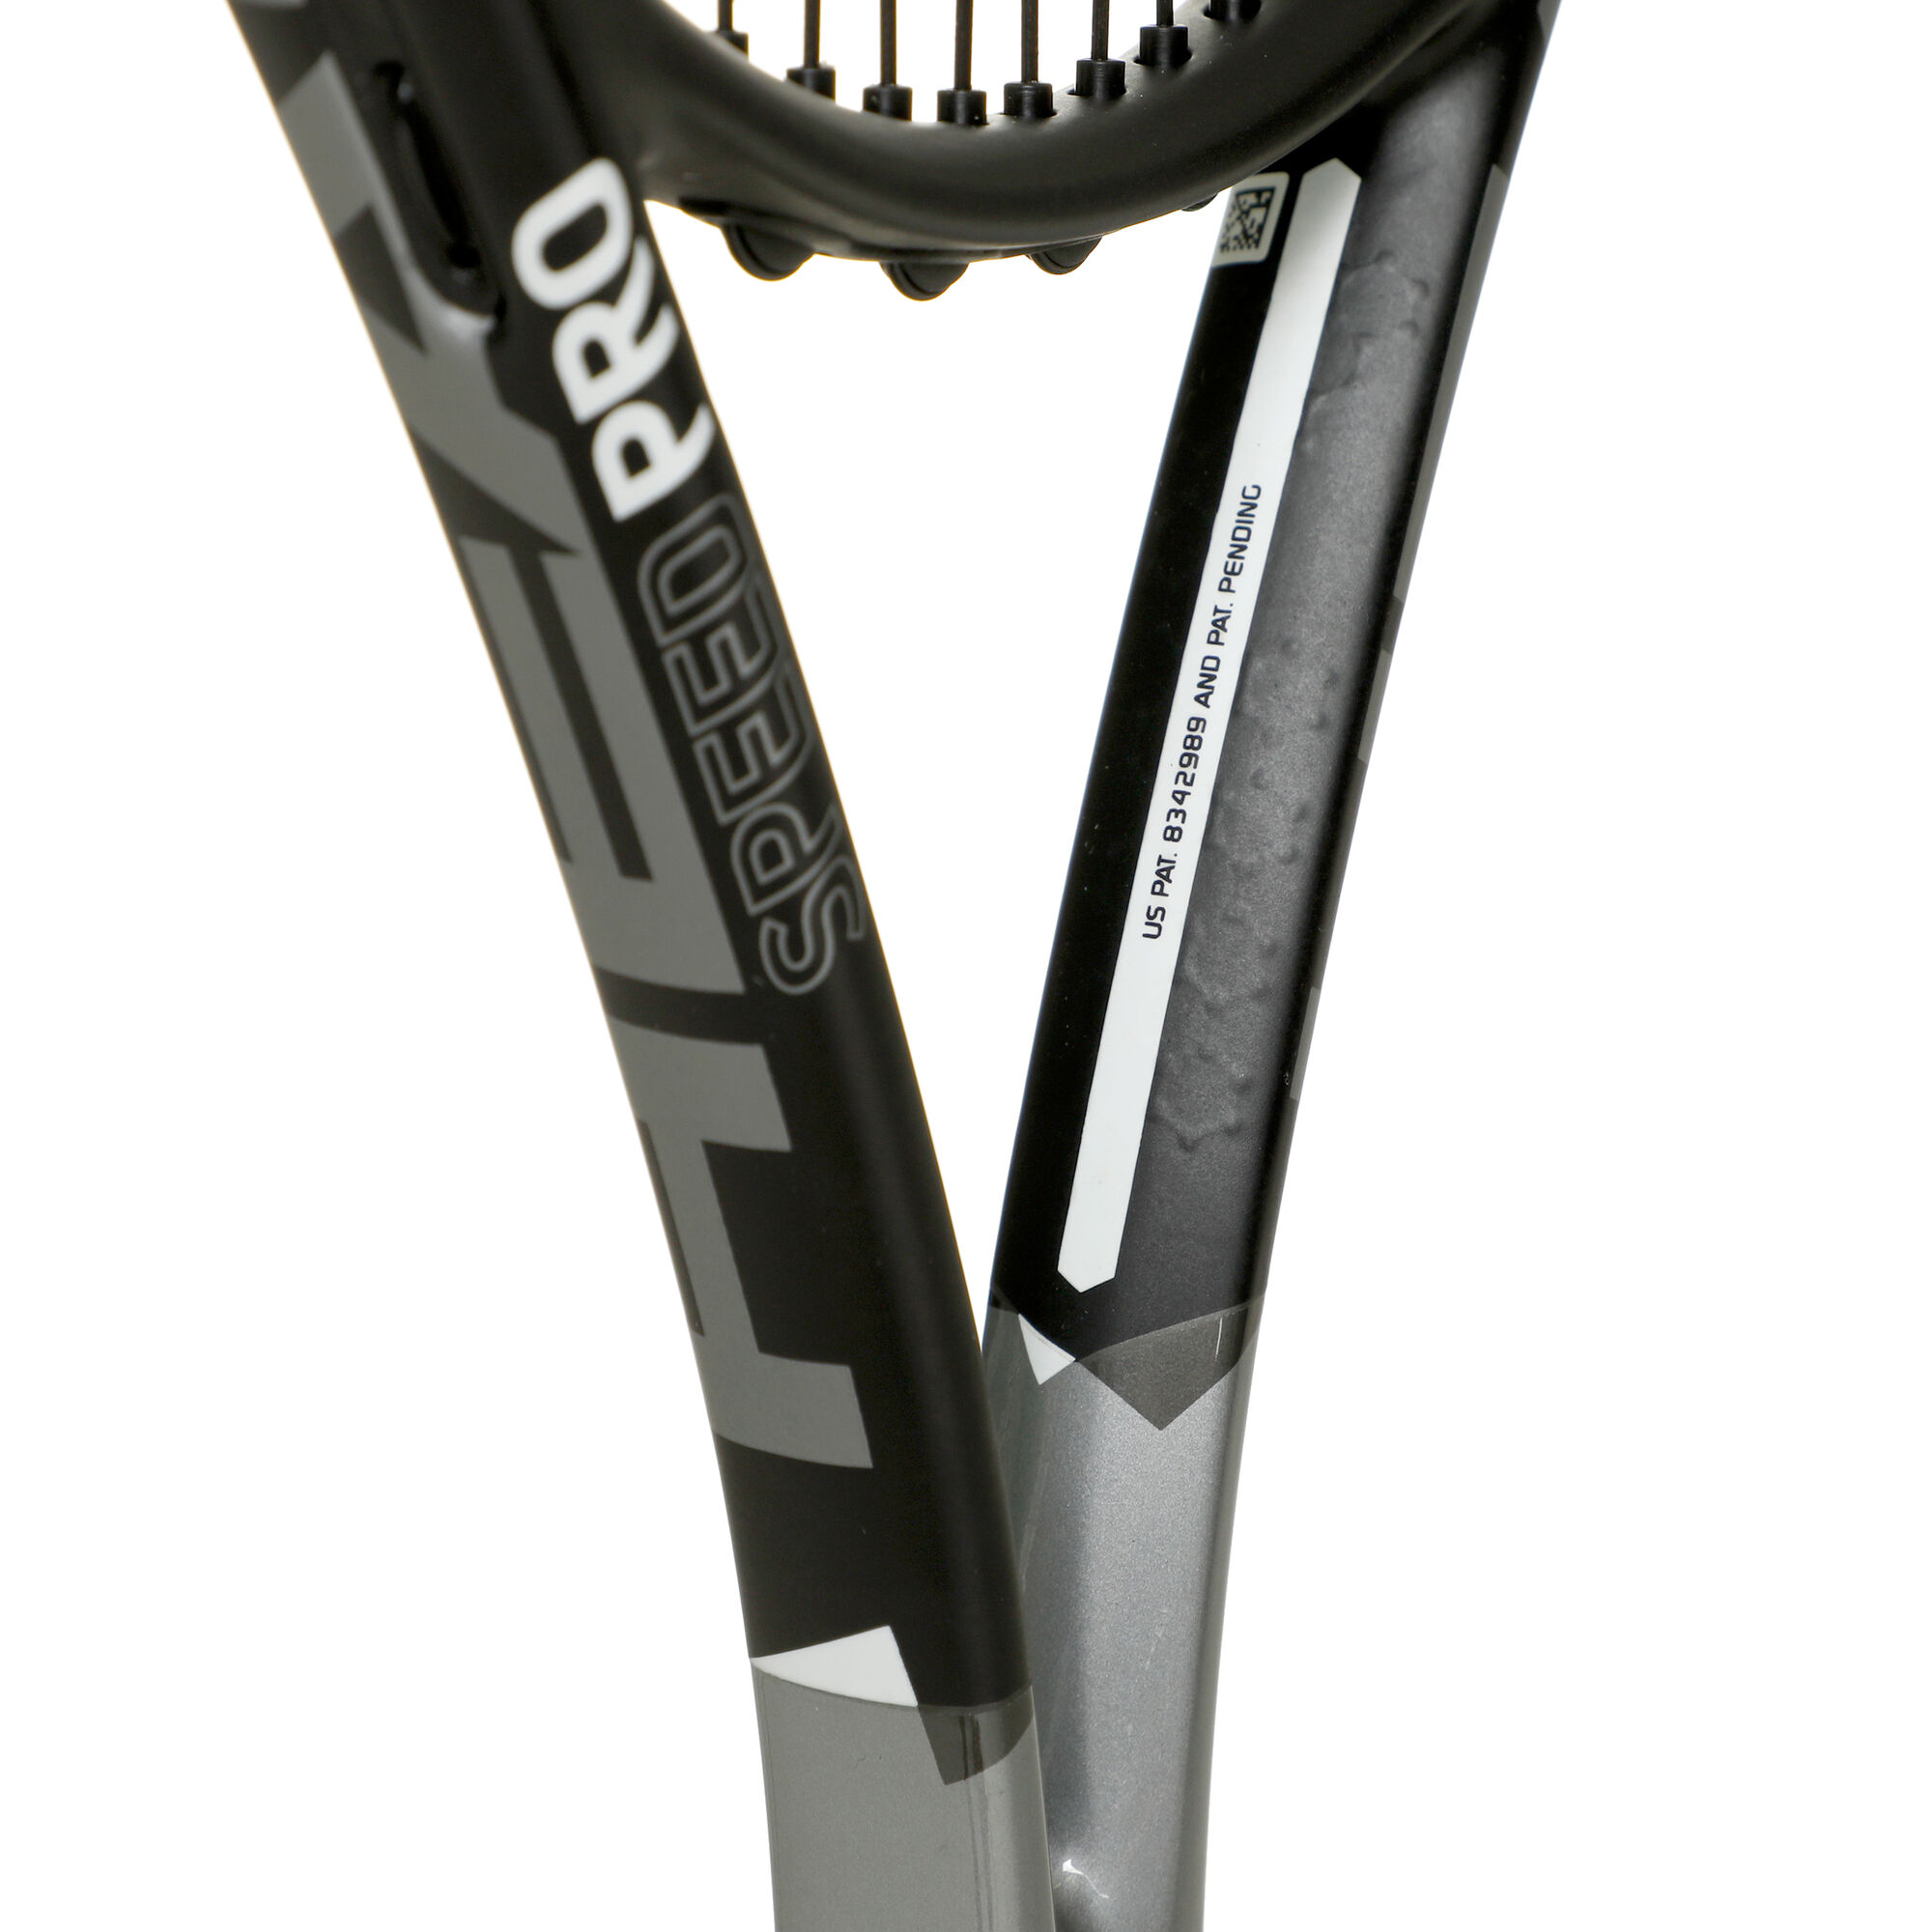 Buy HEAD Speed (strung, Pro Tennis | 2022 Point online COM Edition) Special